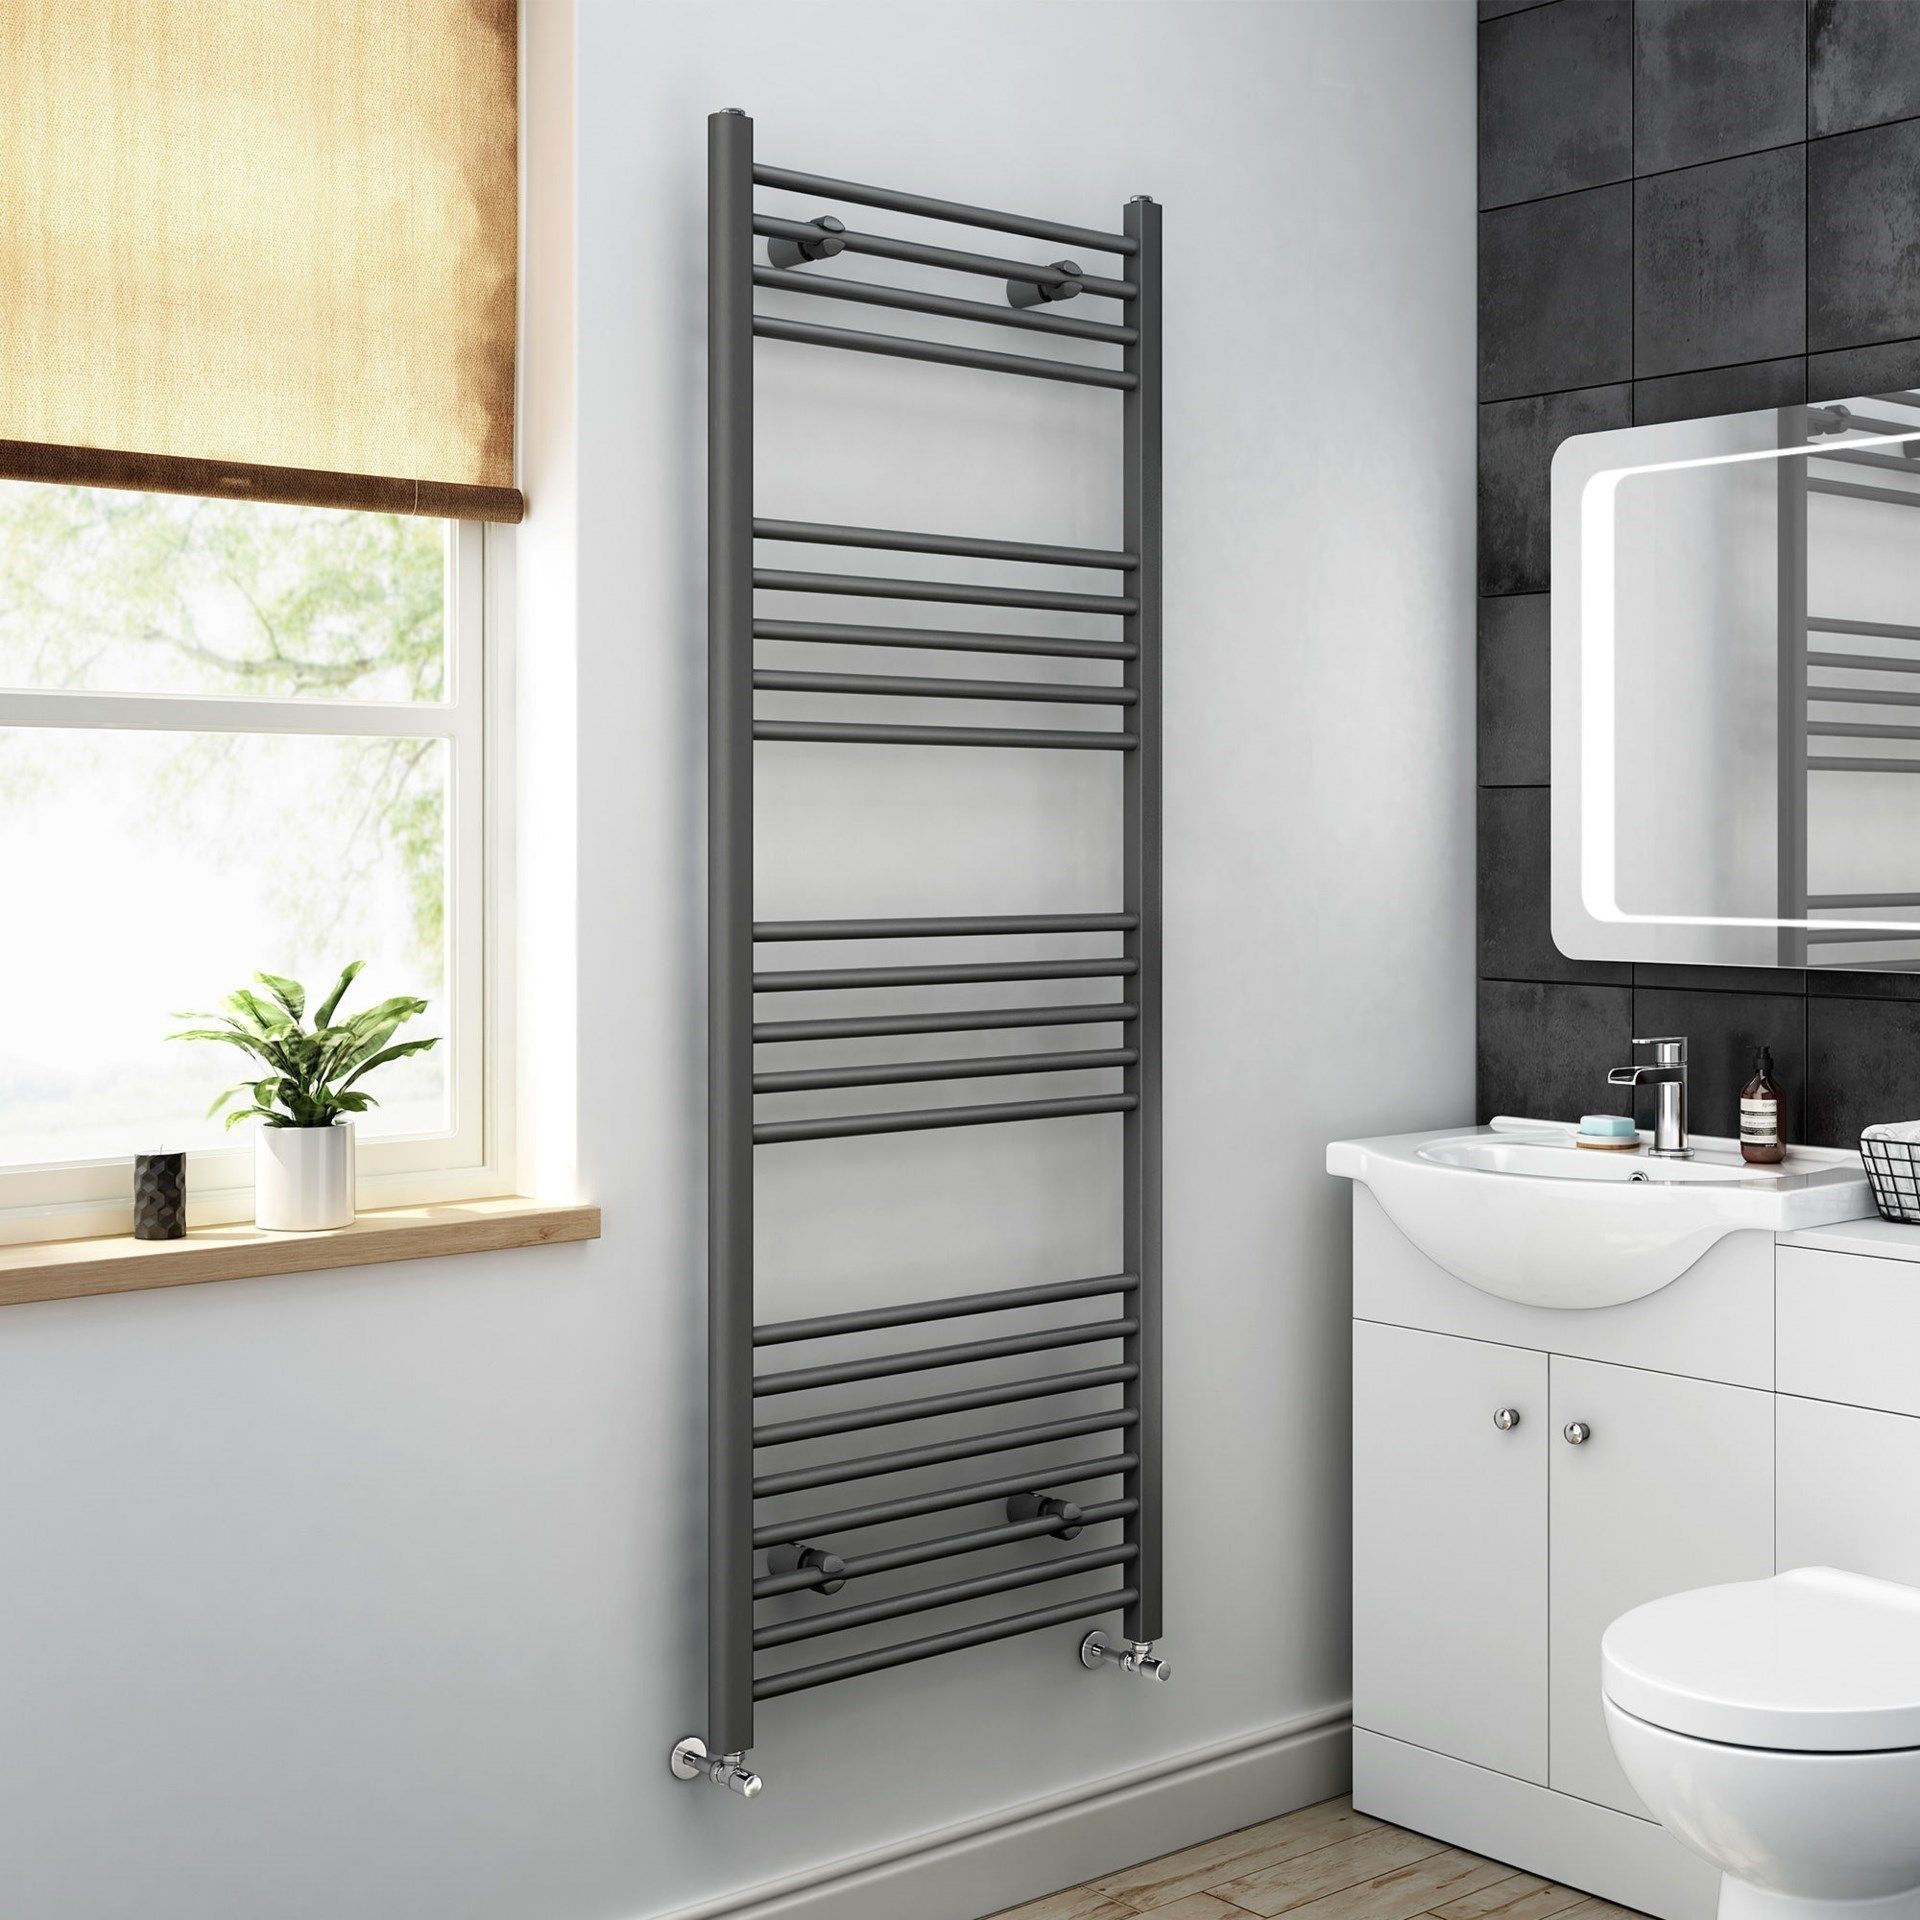 1600x600mm - 20mm Tubes - Anthracite Heated Straight Rail Ladder Towel Radiator. Na1600600.RRP... - Image 2 of 2